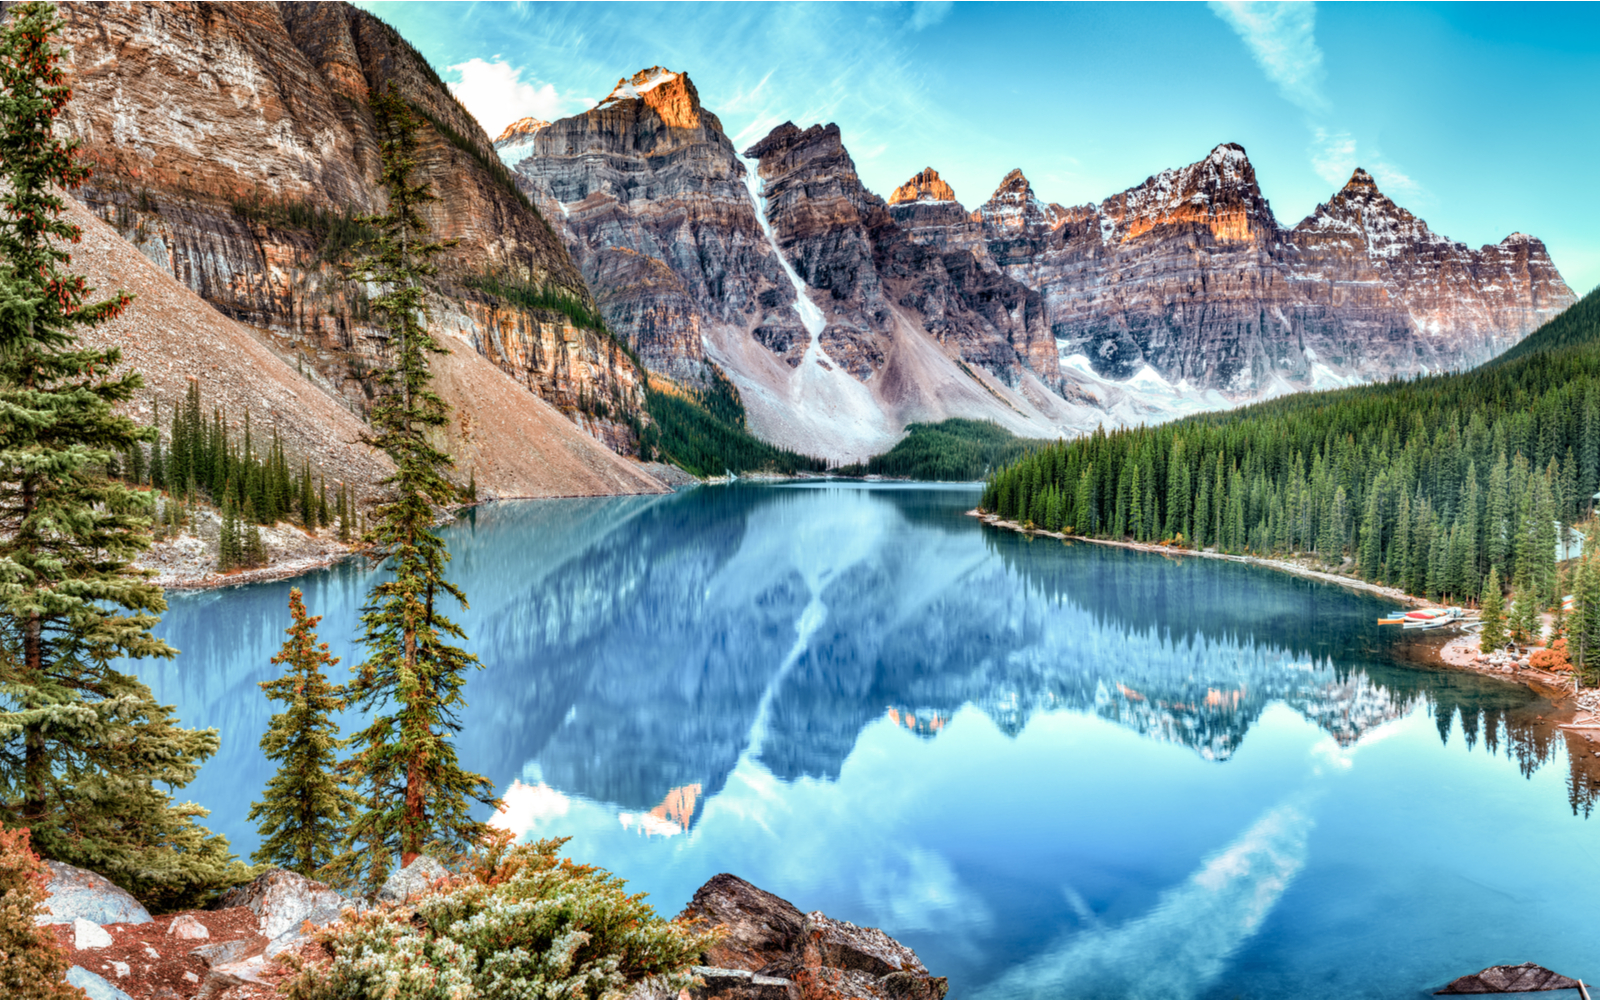 Moraine lake pictured during the best time to visit Banff National Park